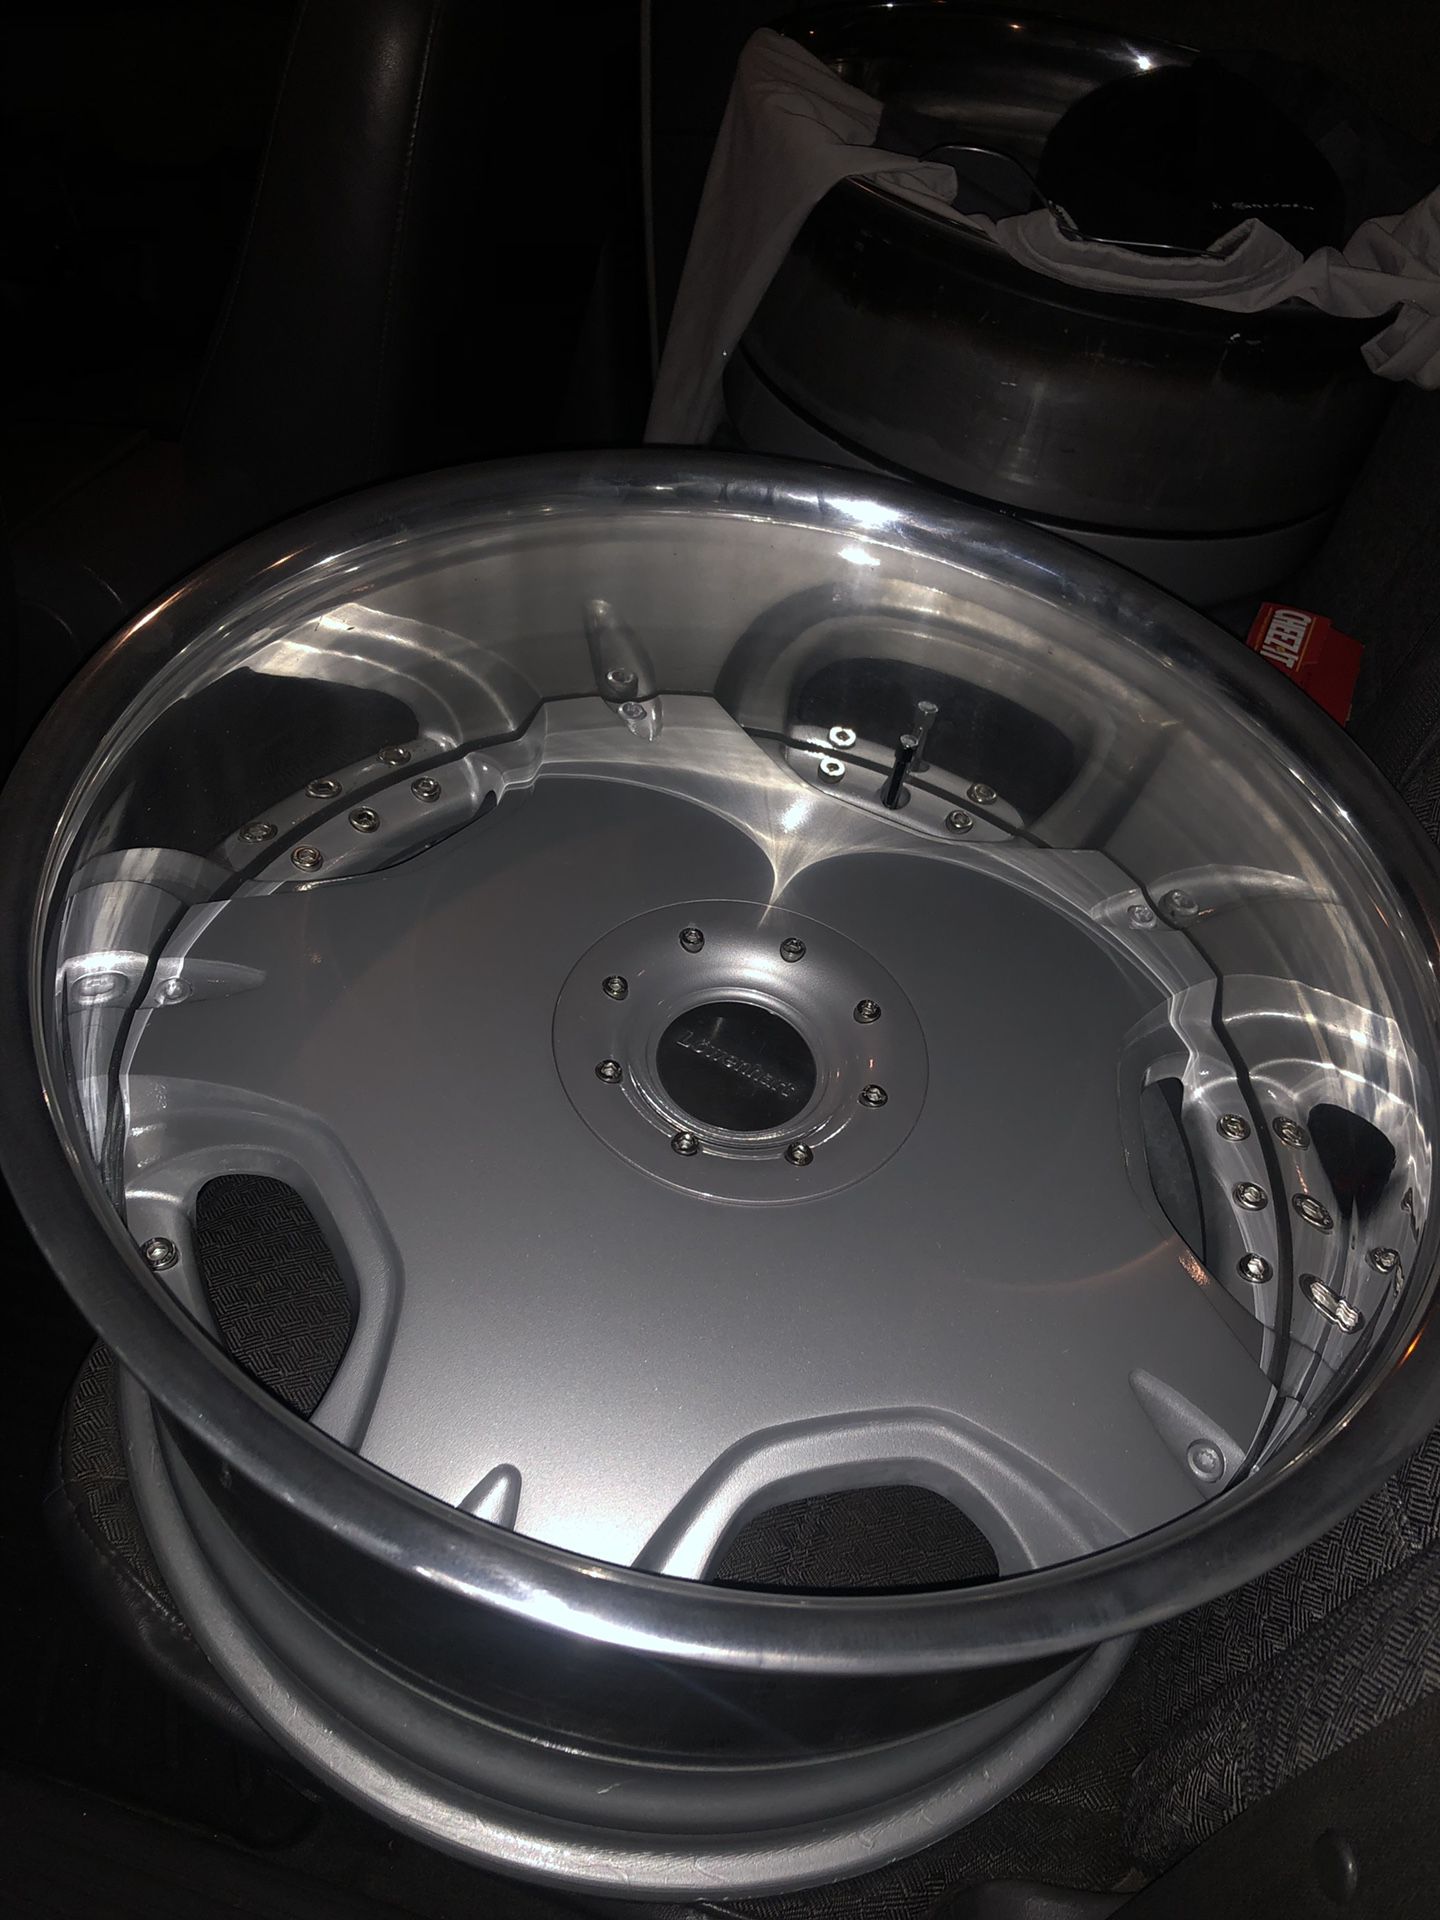 Lowenhart ldr vip wheels for Sale in San Marcos, CA - OfferUp